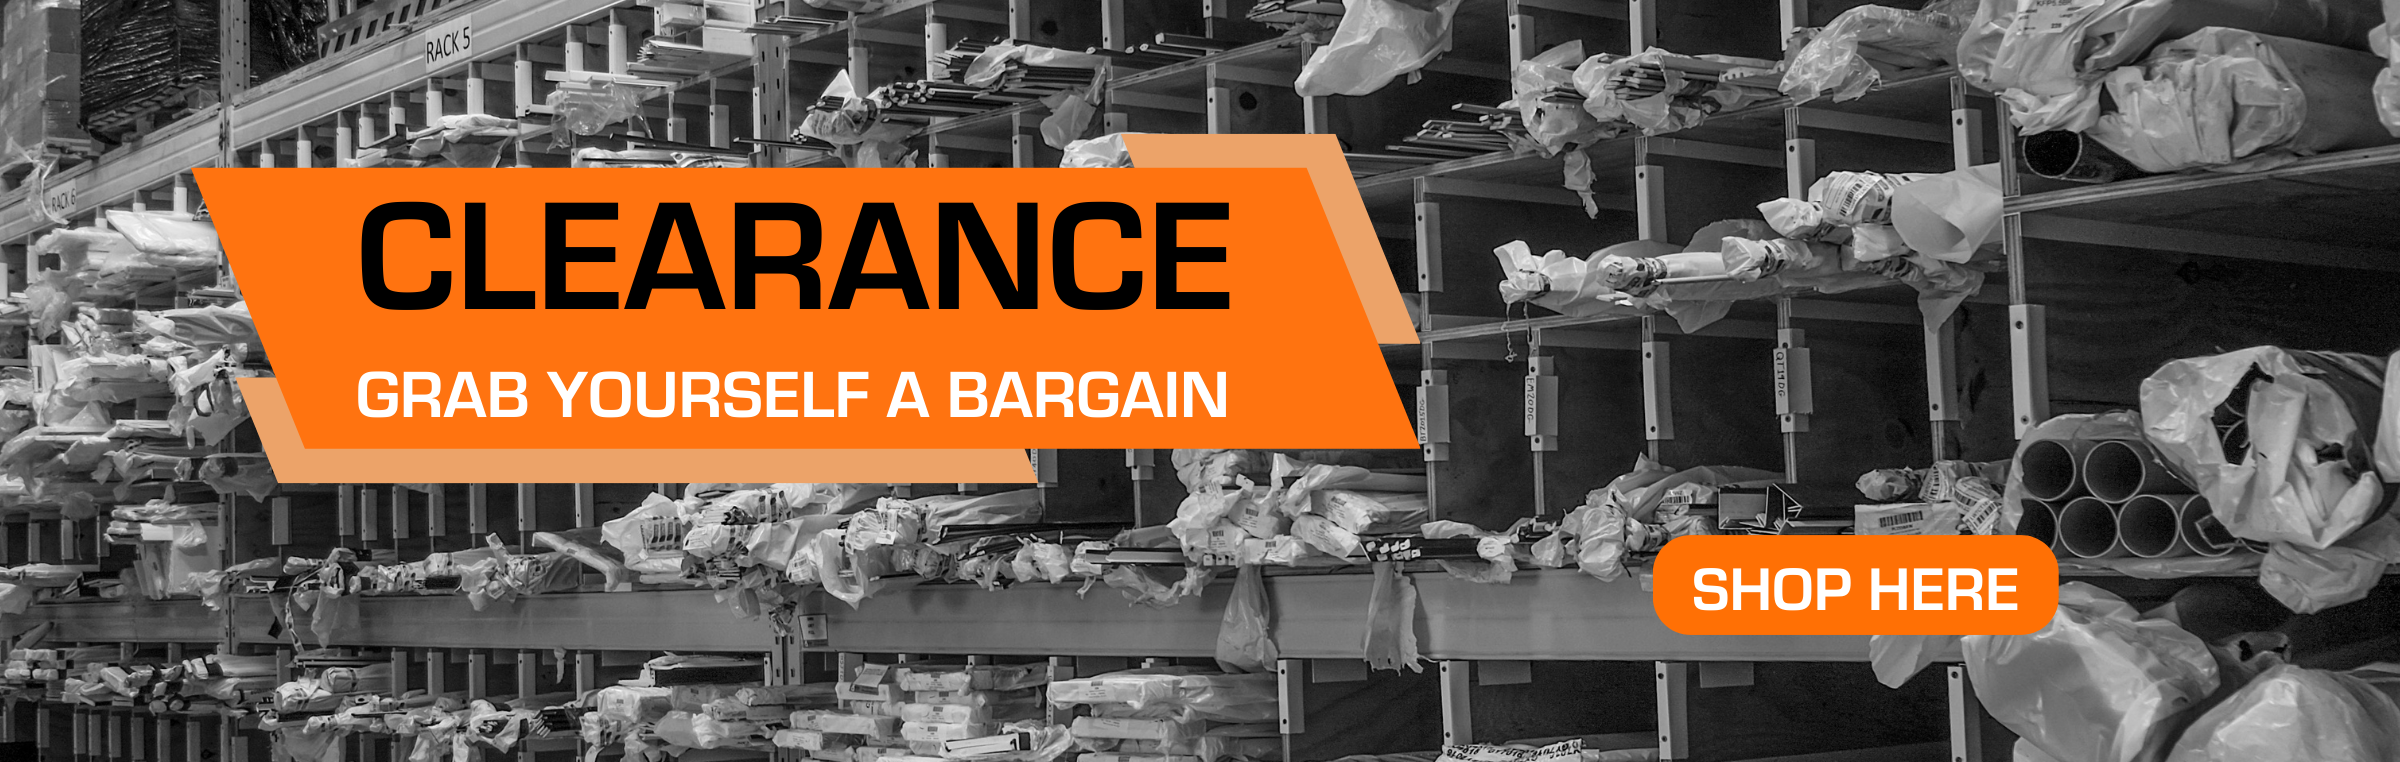 New clearance section